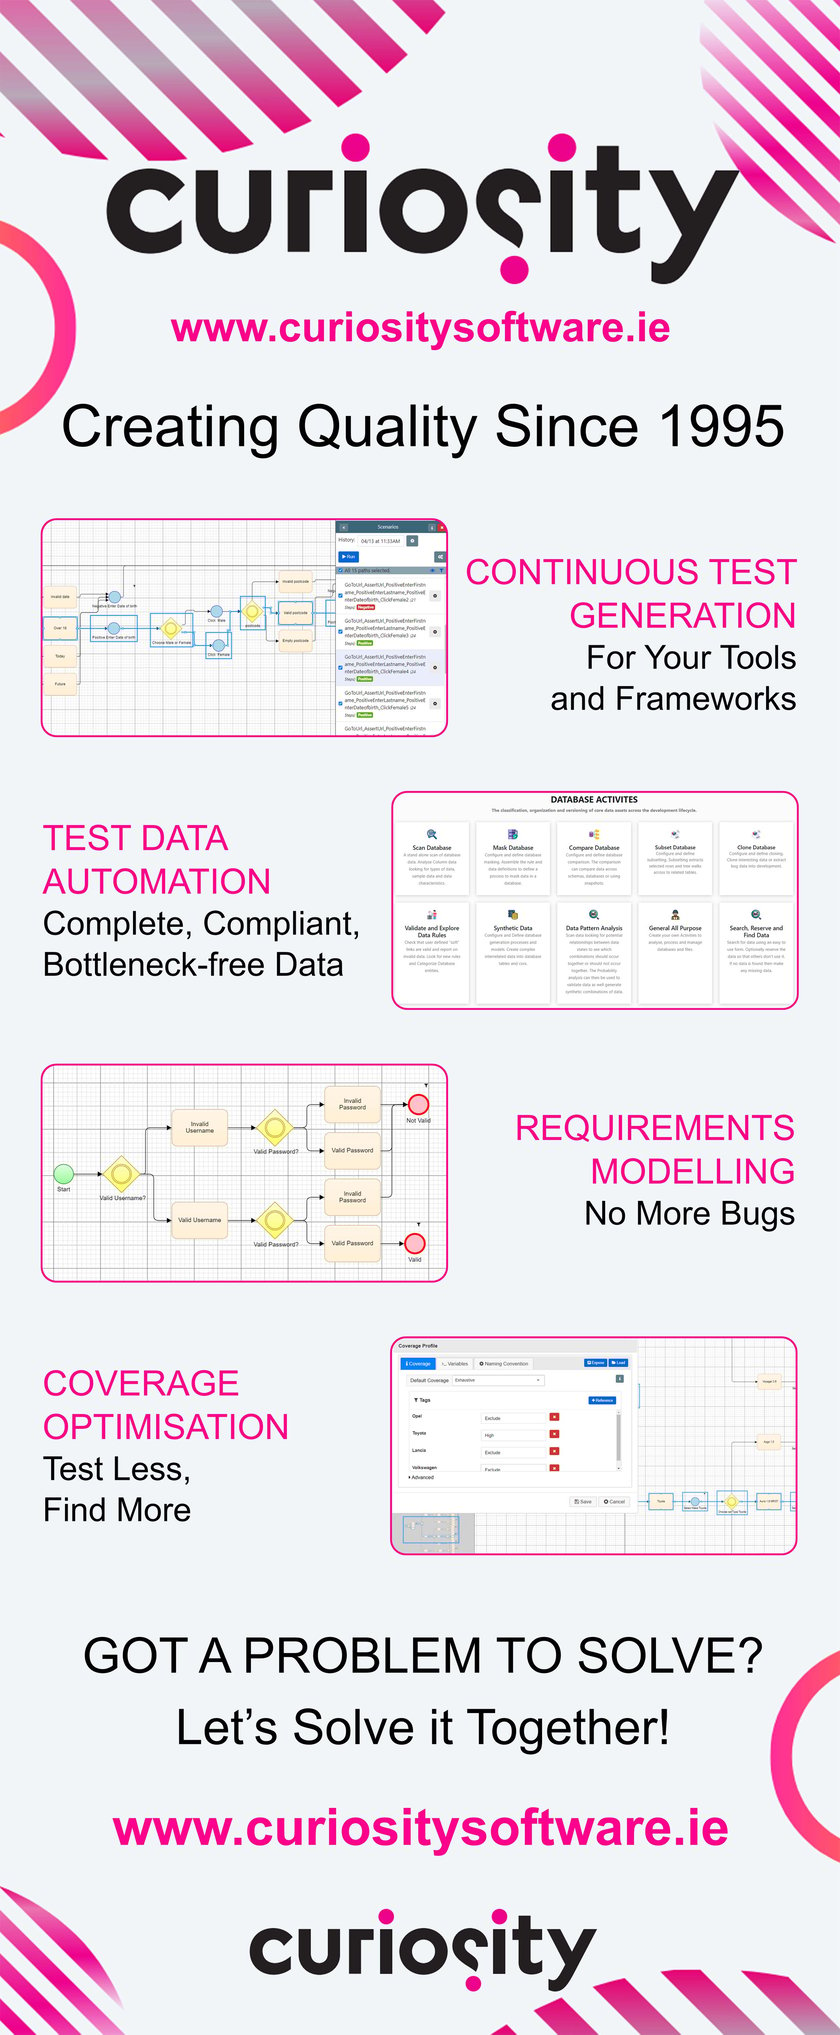 This infographic highlights key ways that Curiosity's tools, Test Modeller and Test Data Automation, can help you build quality software! 